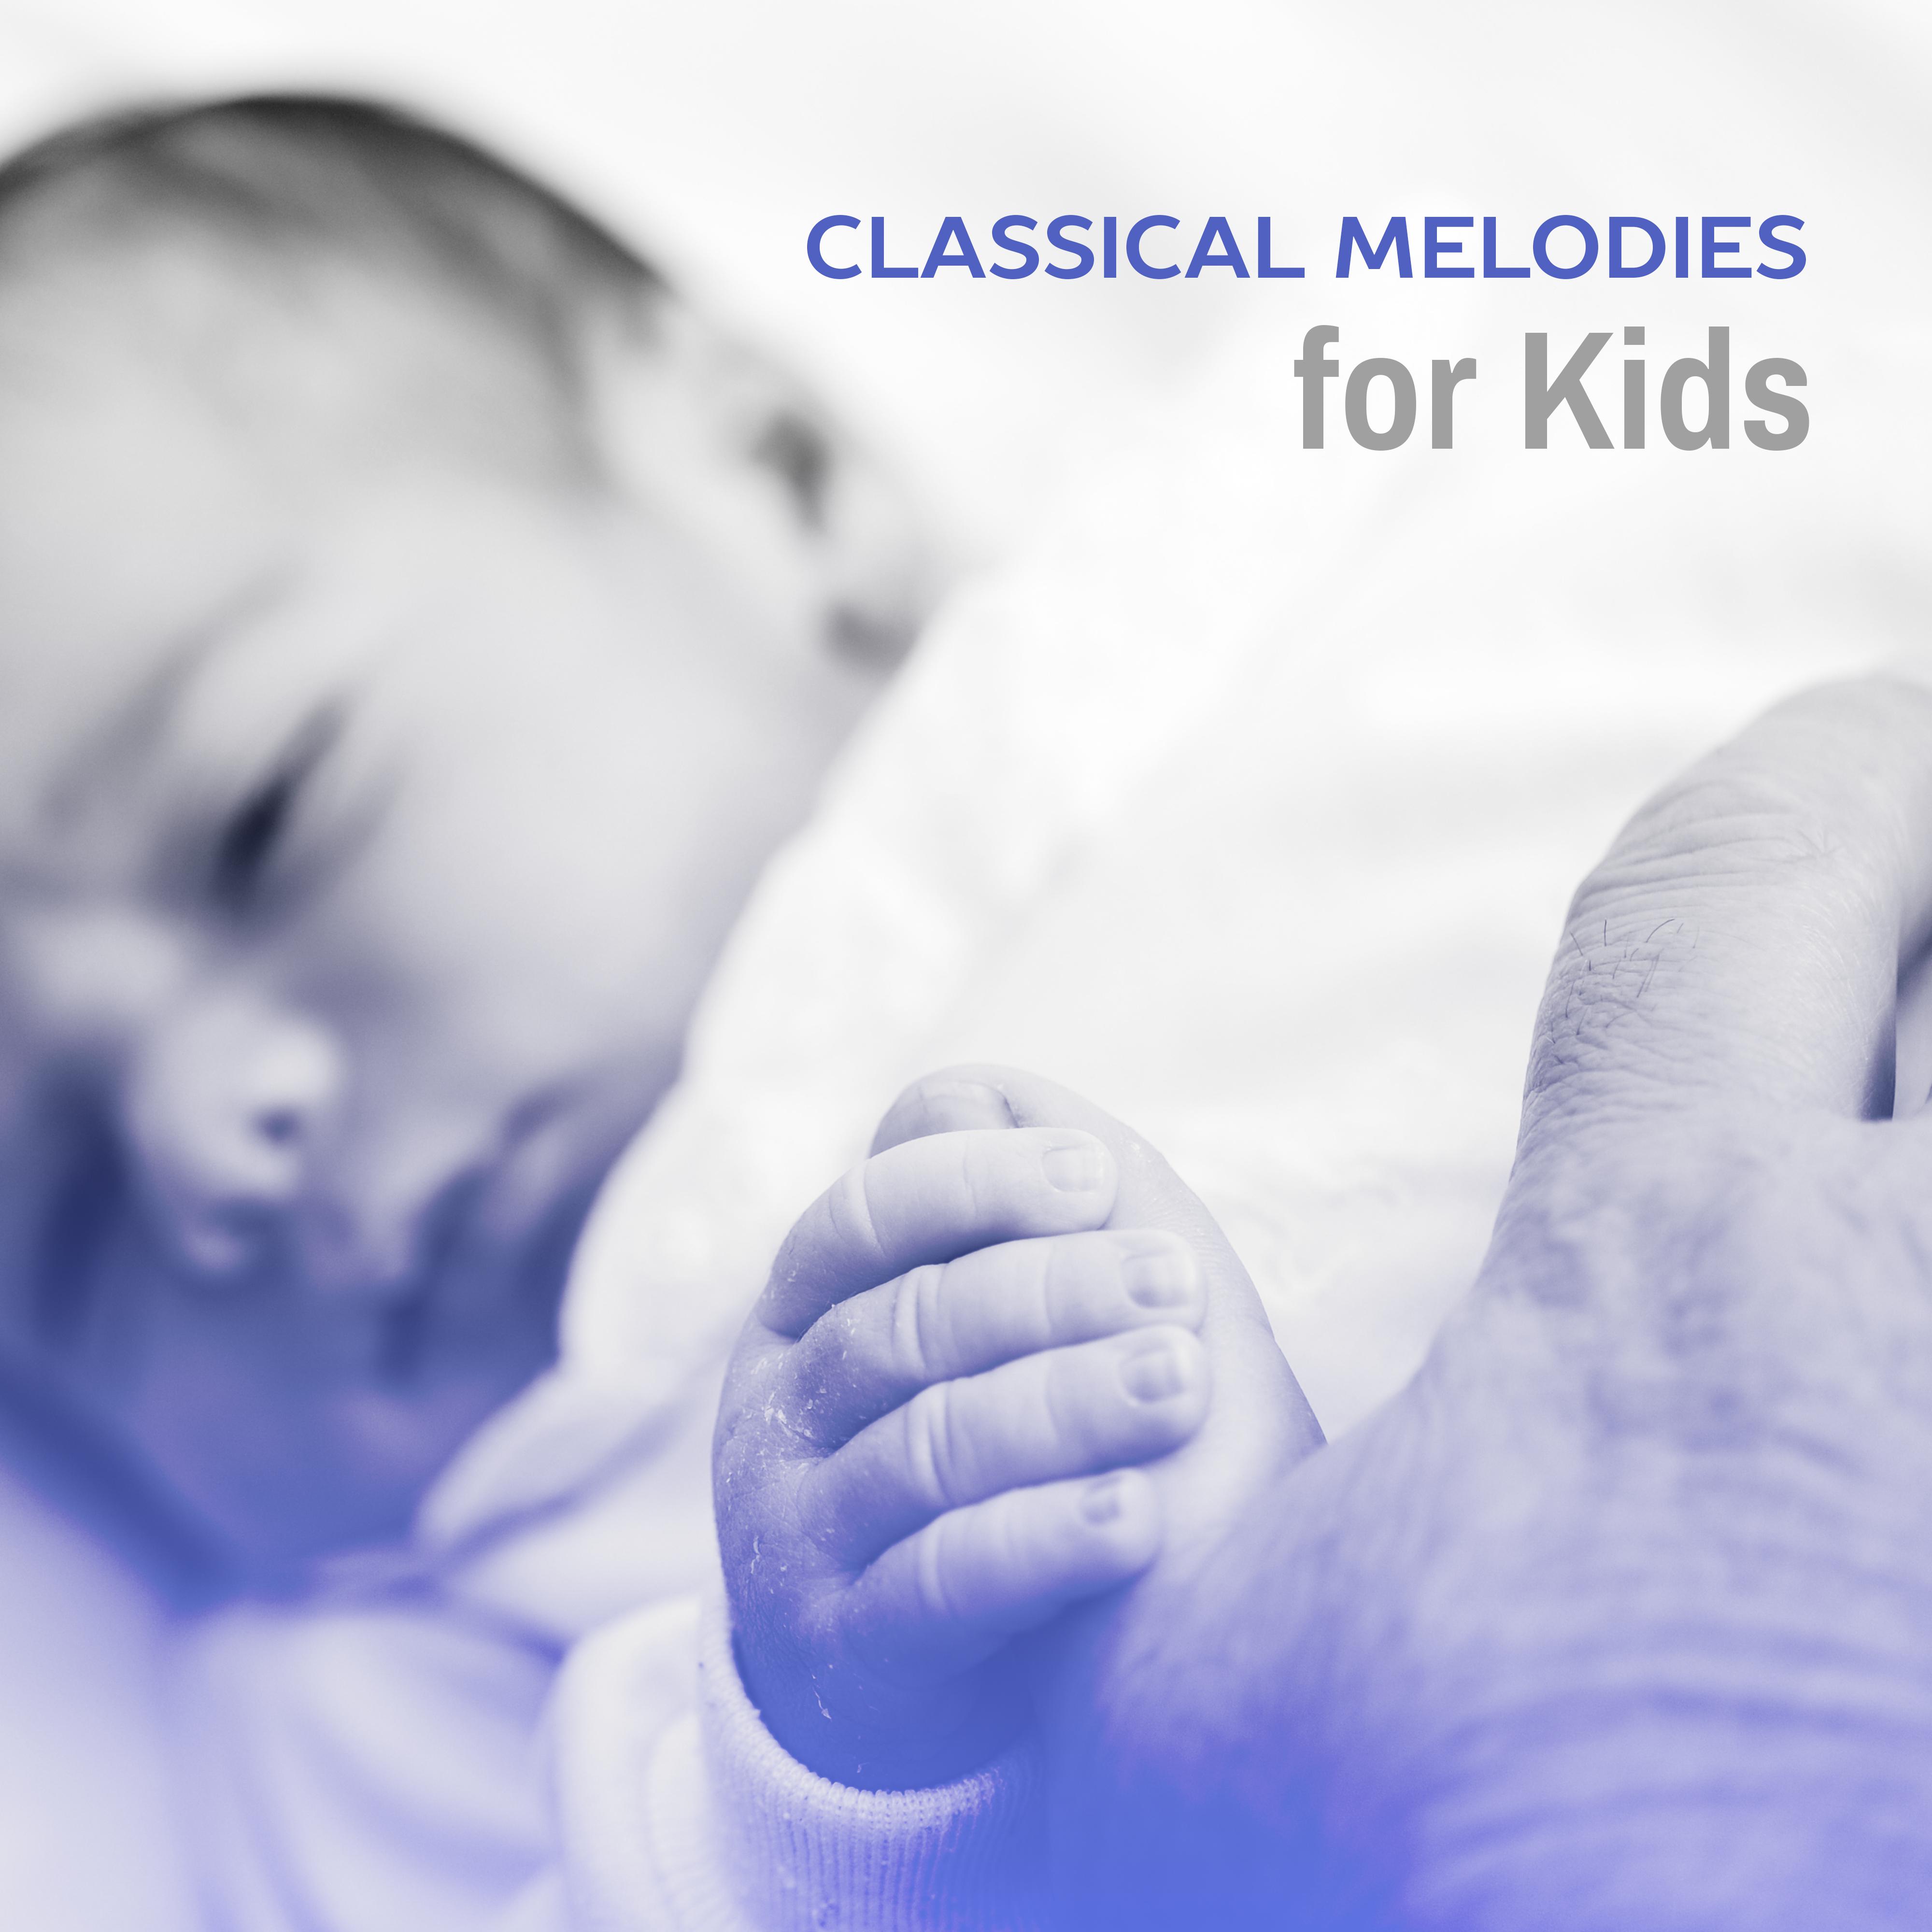 Classical Melodies for Kids – Soft Piano Sounds for Kids, Easy Listening, Classics to Calm Down Baby